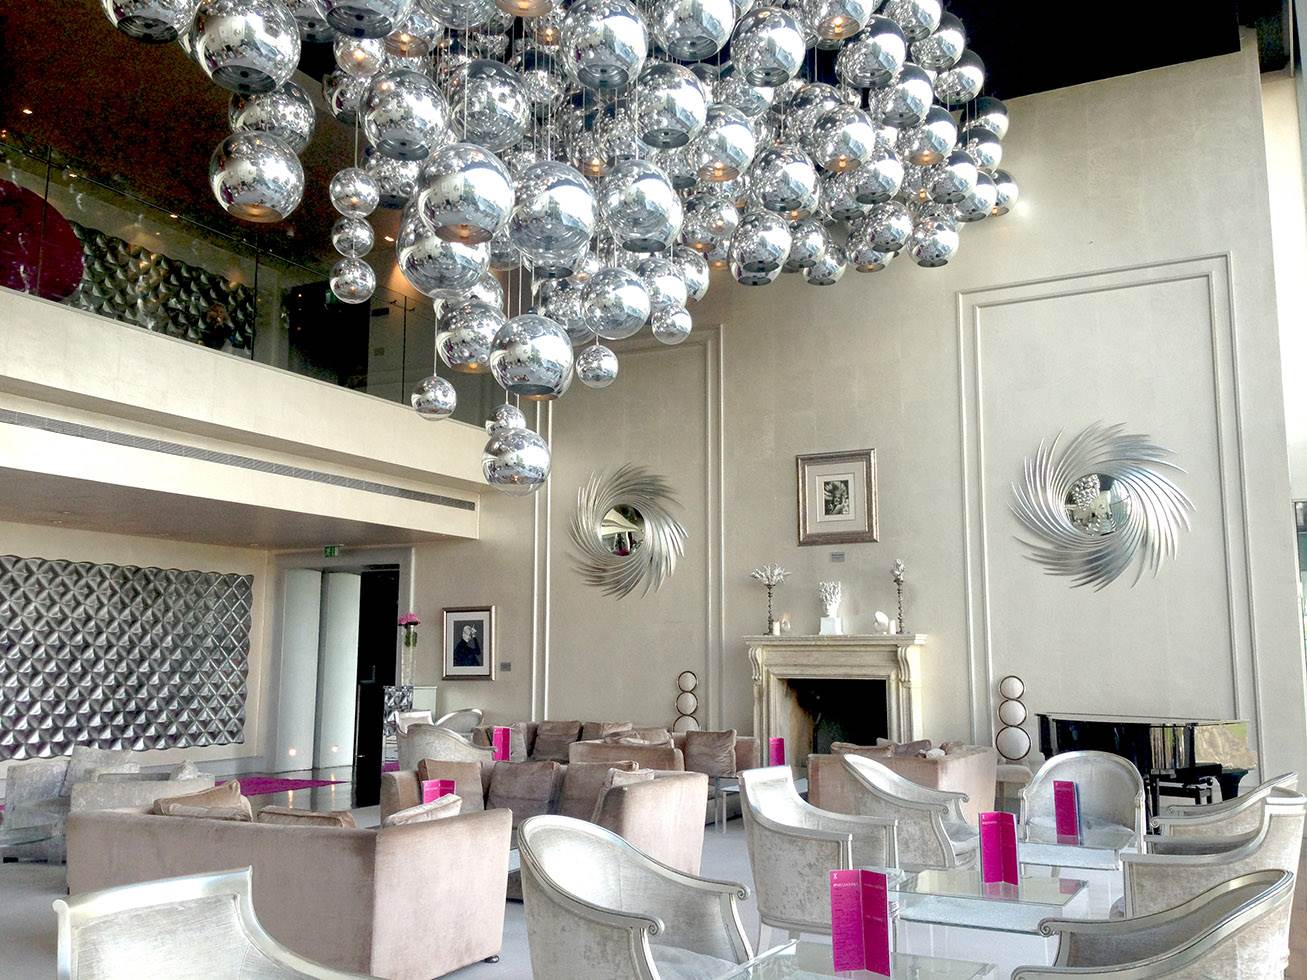 The G Hotel Grand Salon in Galway